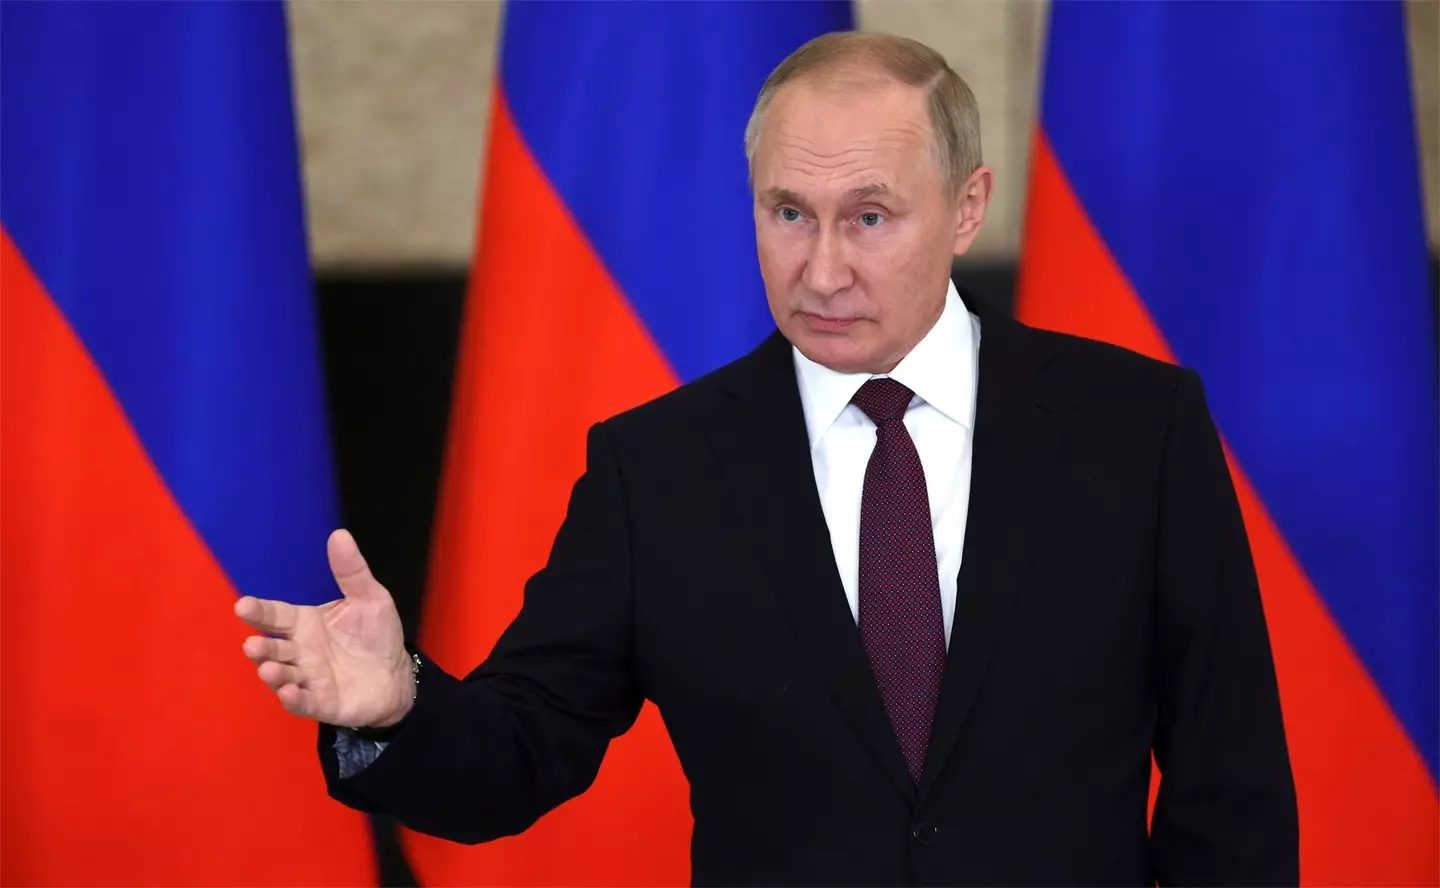 Vladimir Putin warned that he'd use nuclear weapons if Russian territory was threatened.